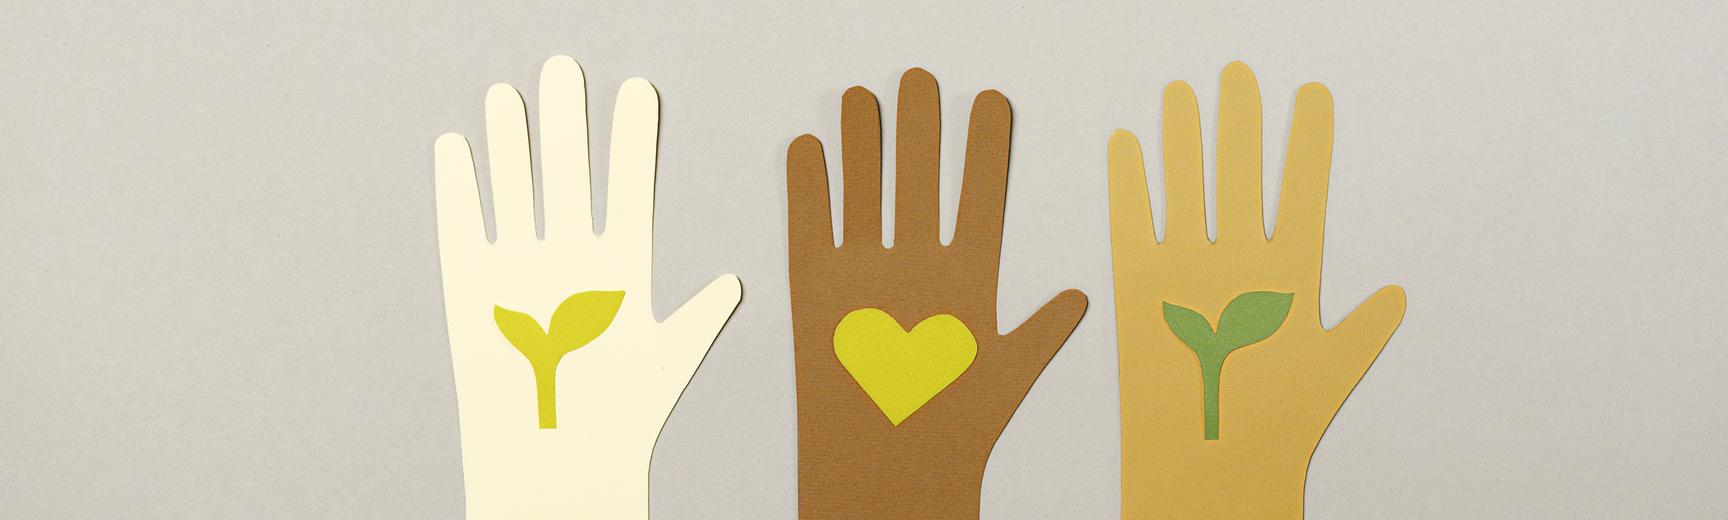 Three paper cut-outs of hands of different skin colour, each holding a paper cut out of a leaf or a heart